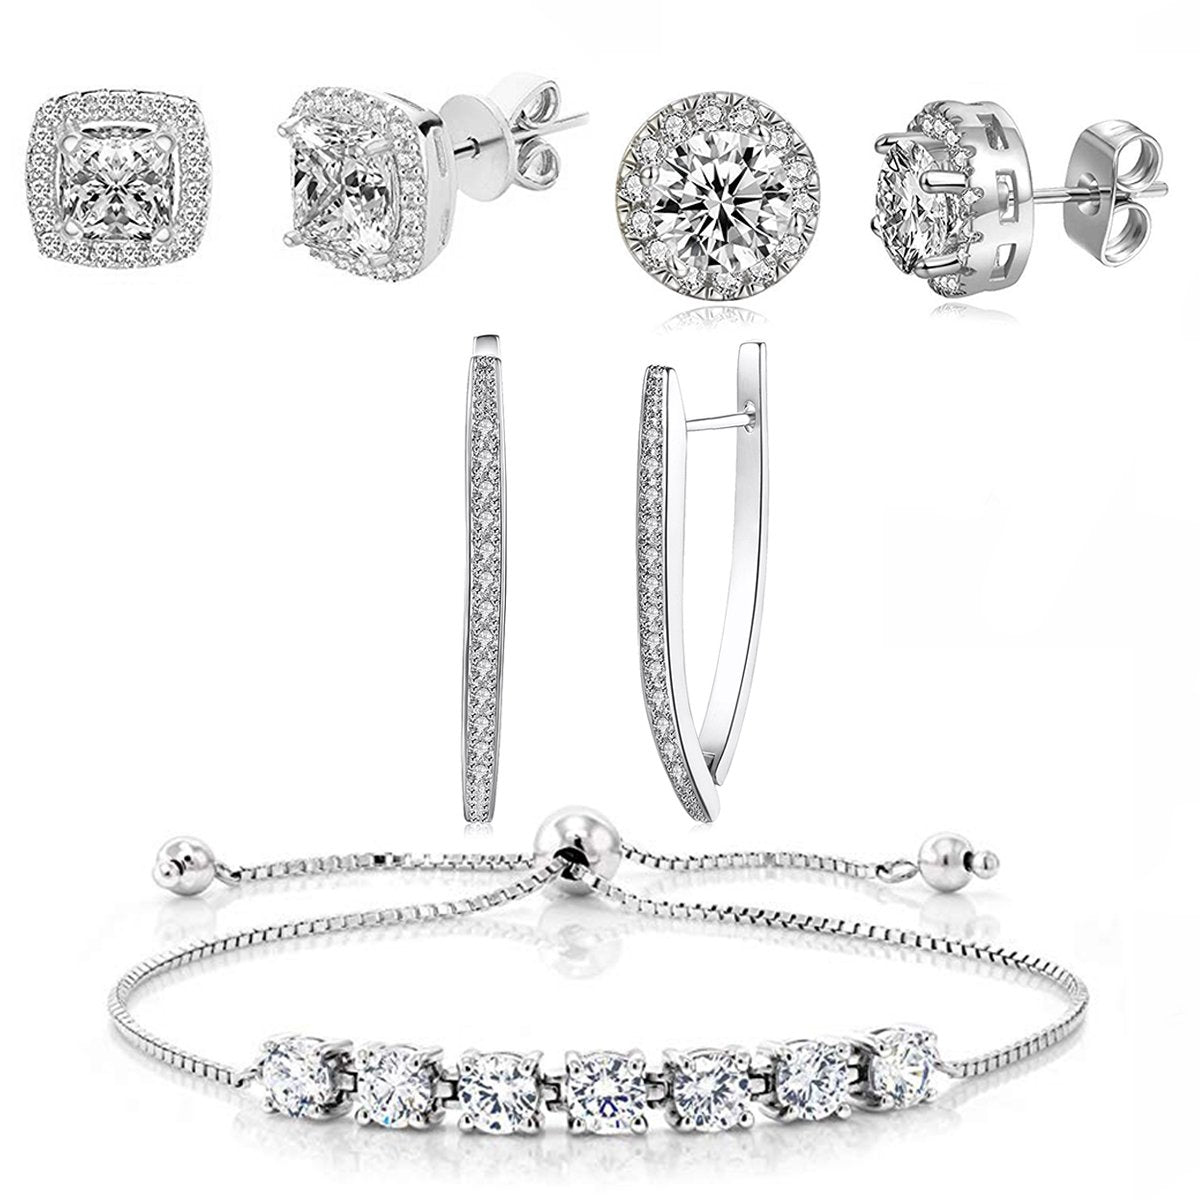 4 Piece Halo Set With Crystals 18K White Gold Plated Set in 18K White Gold Plated ITALY Design Elsy Style Set